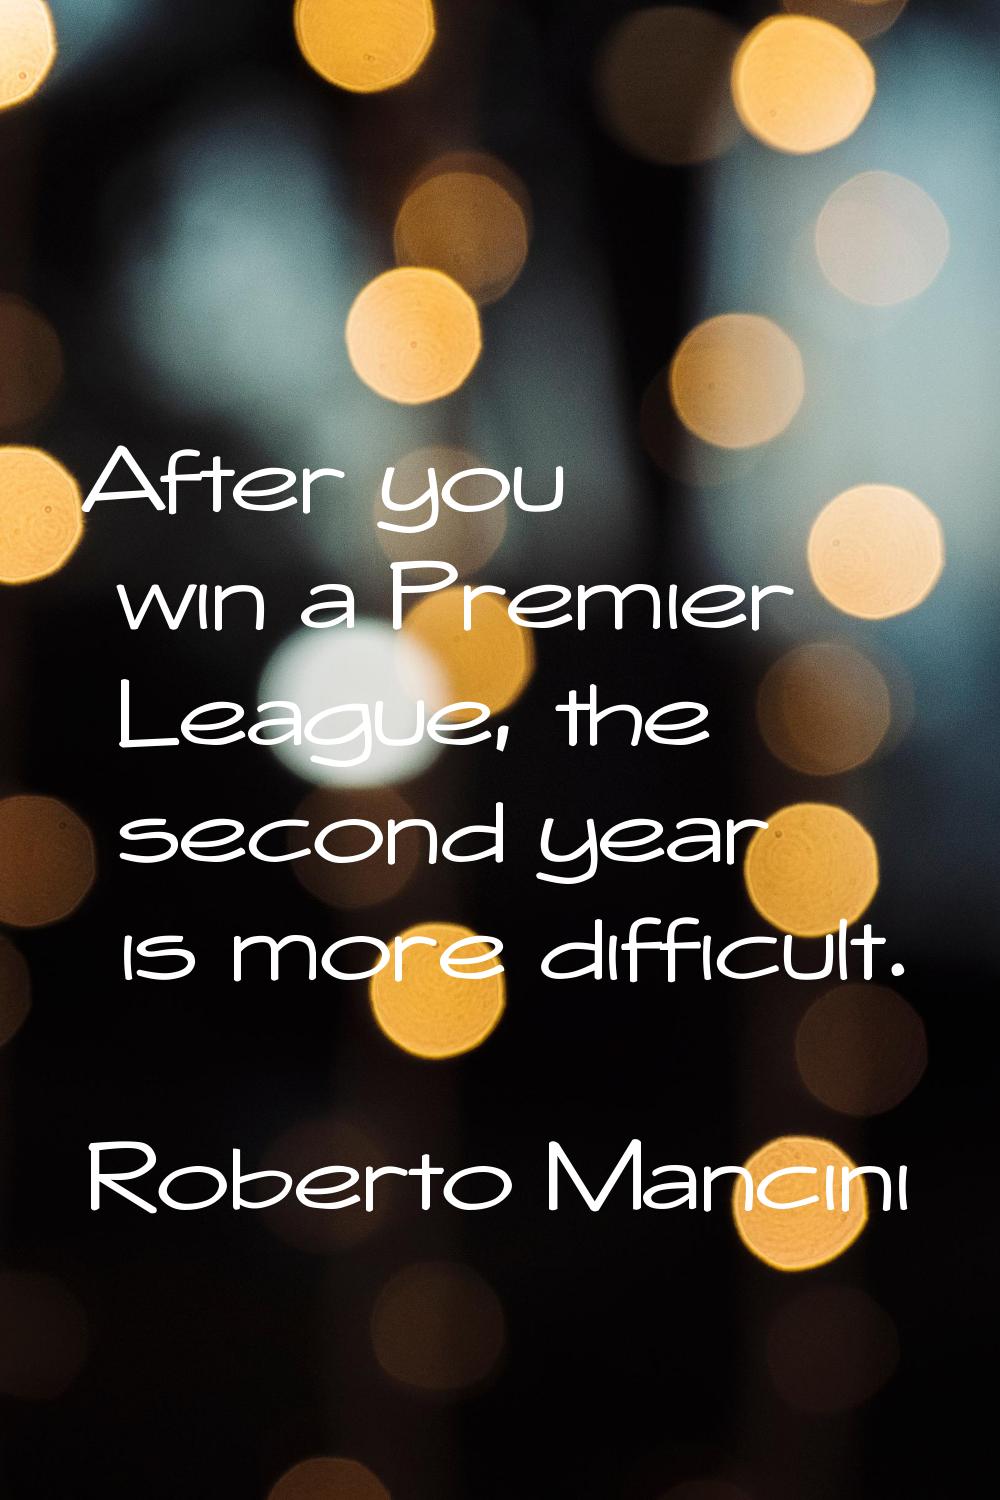 After you win a Premier League, the second year is more difficult.